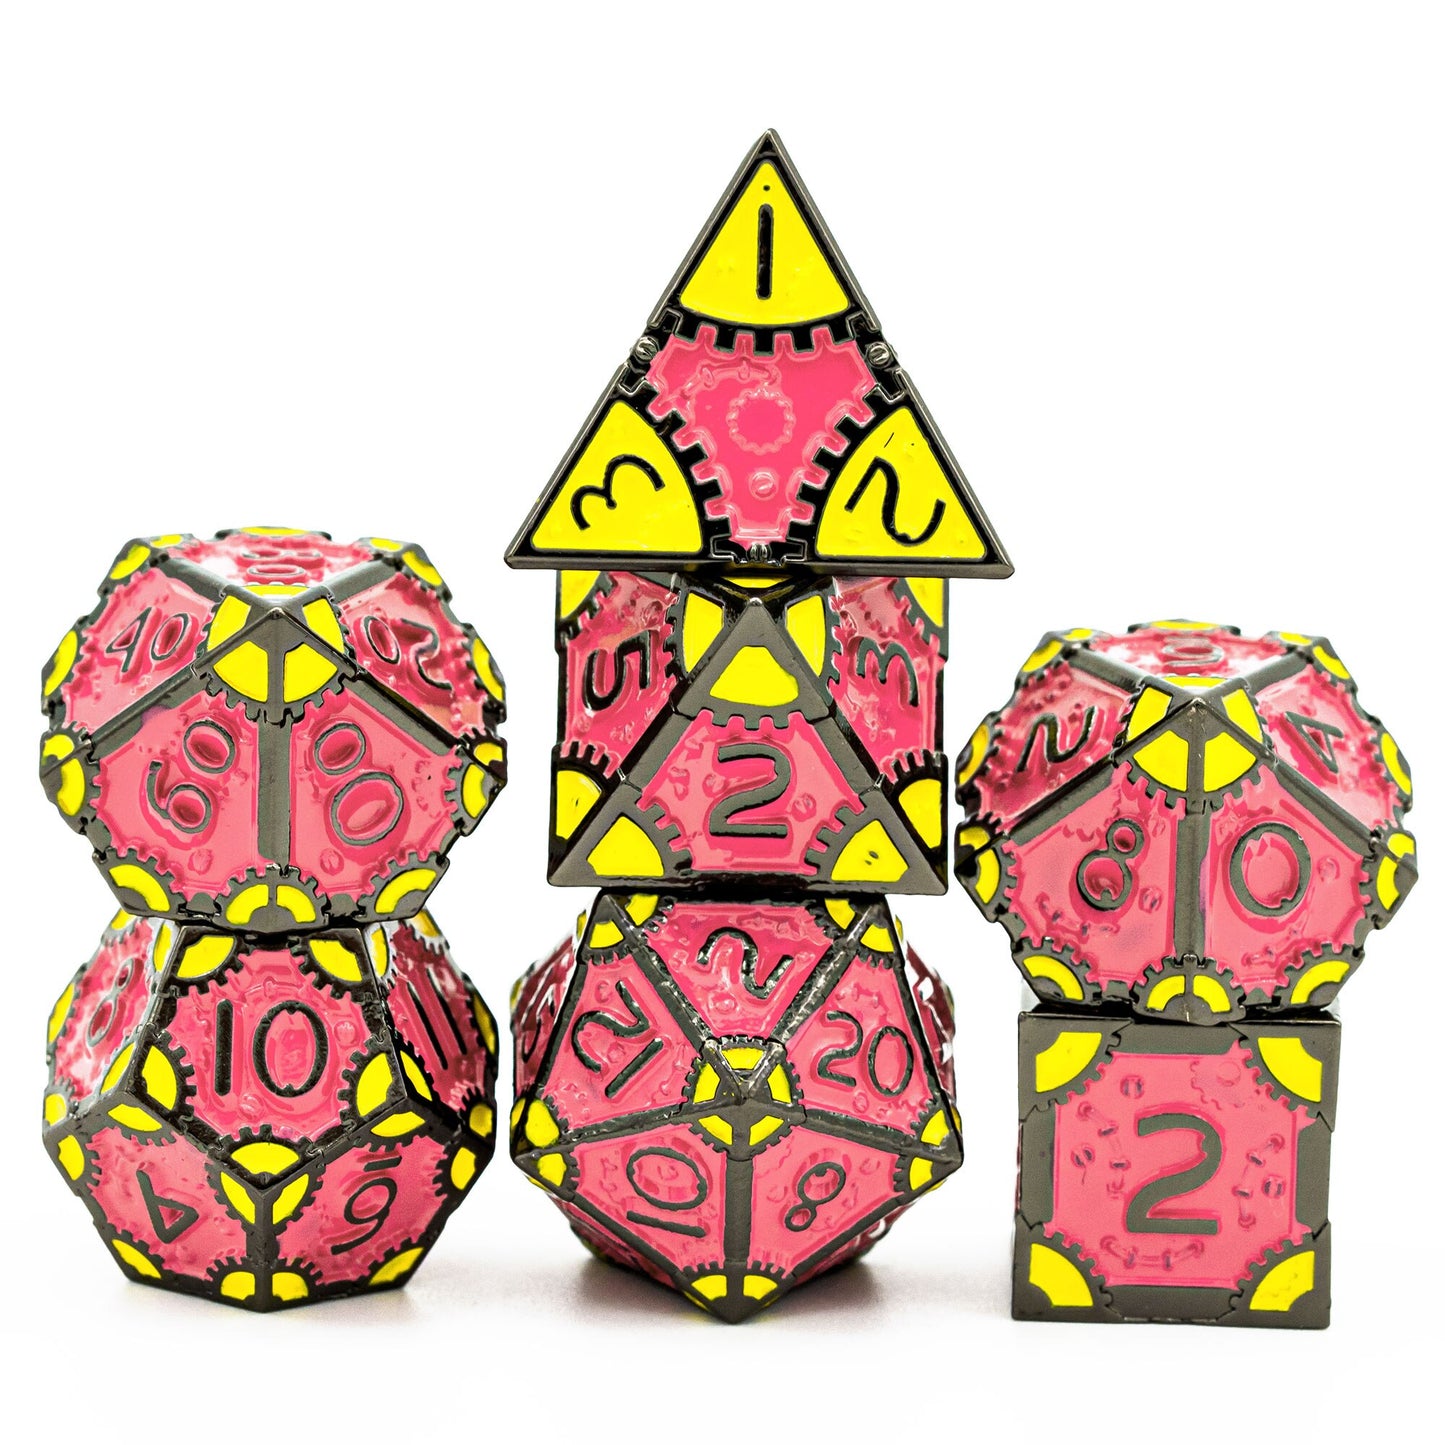 Pink and yellow steampunk dice set